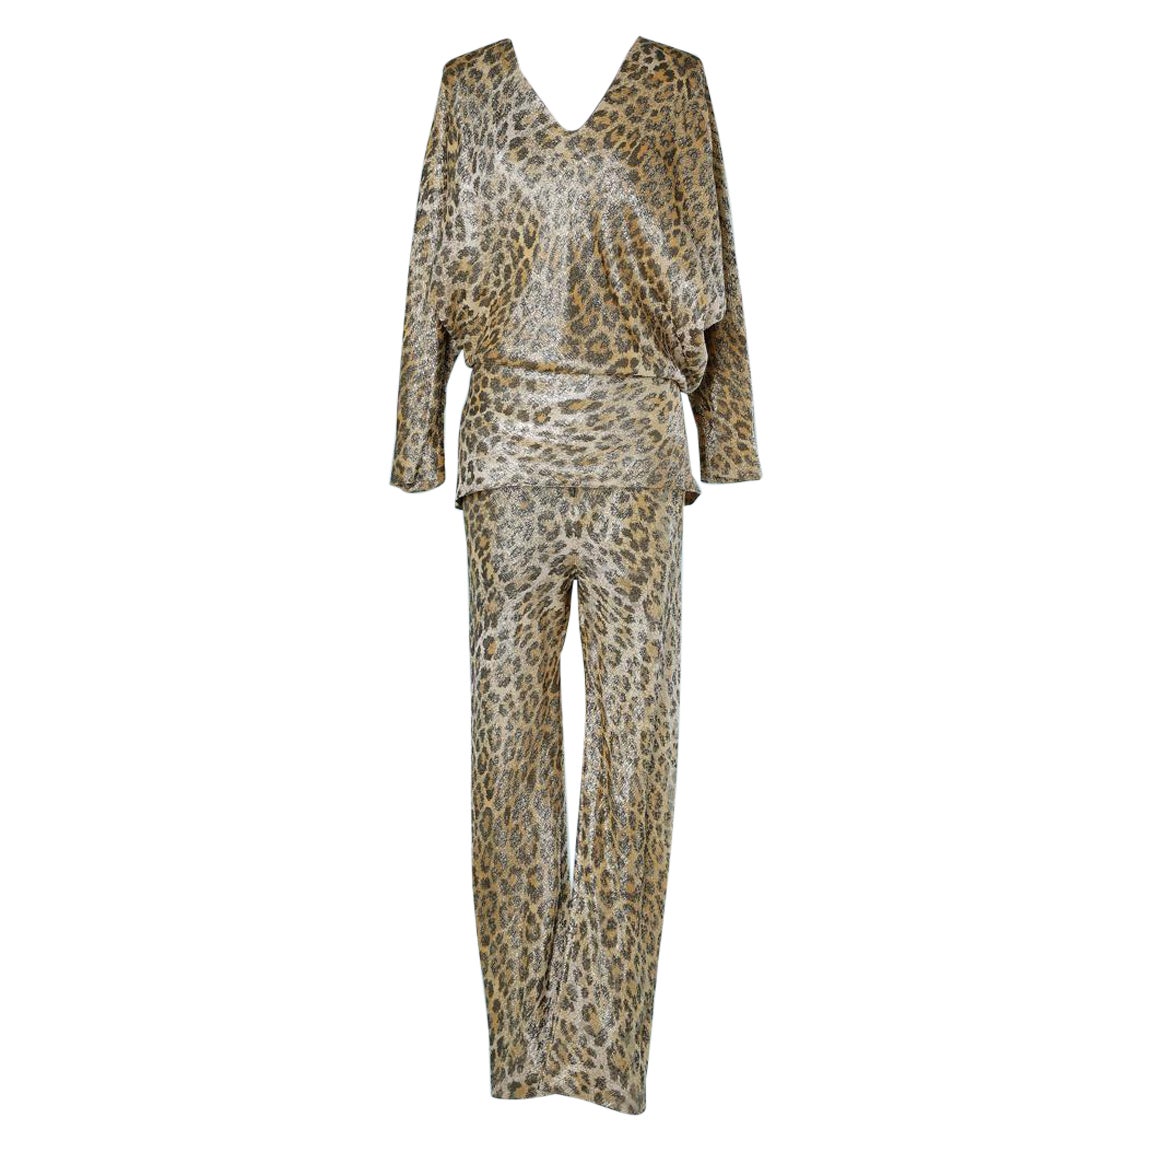 Couture tunique and trouser ensemble in leopard lurex Givenchy F.W 1969 Numbered